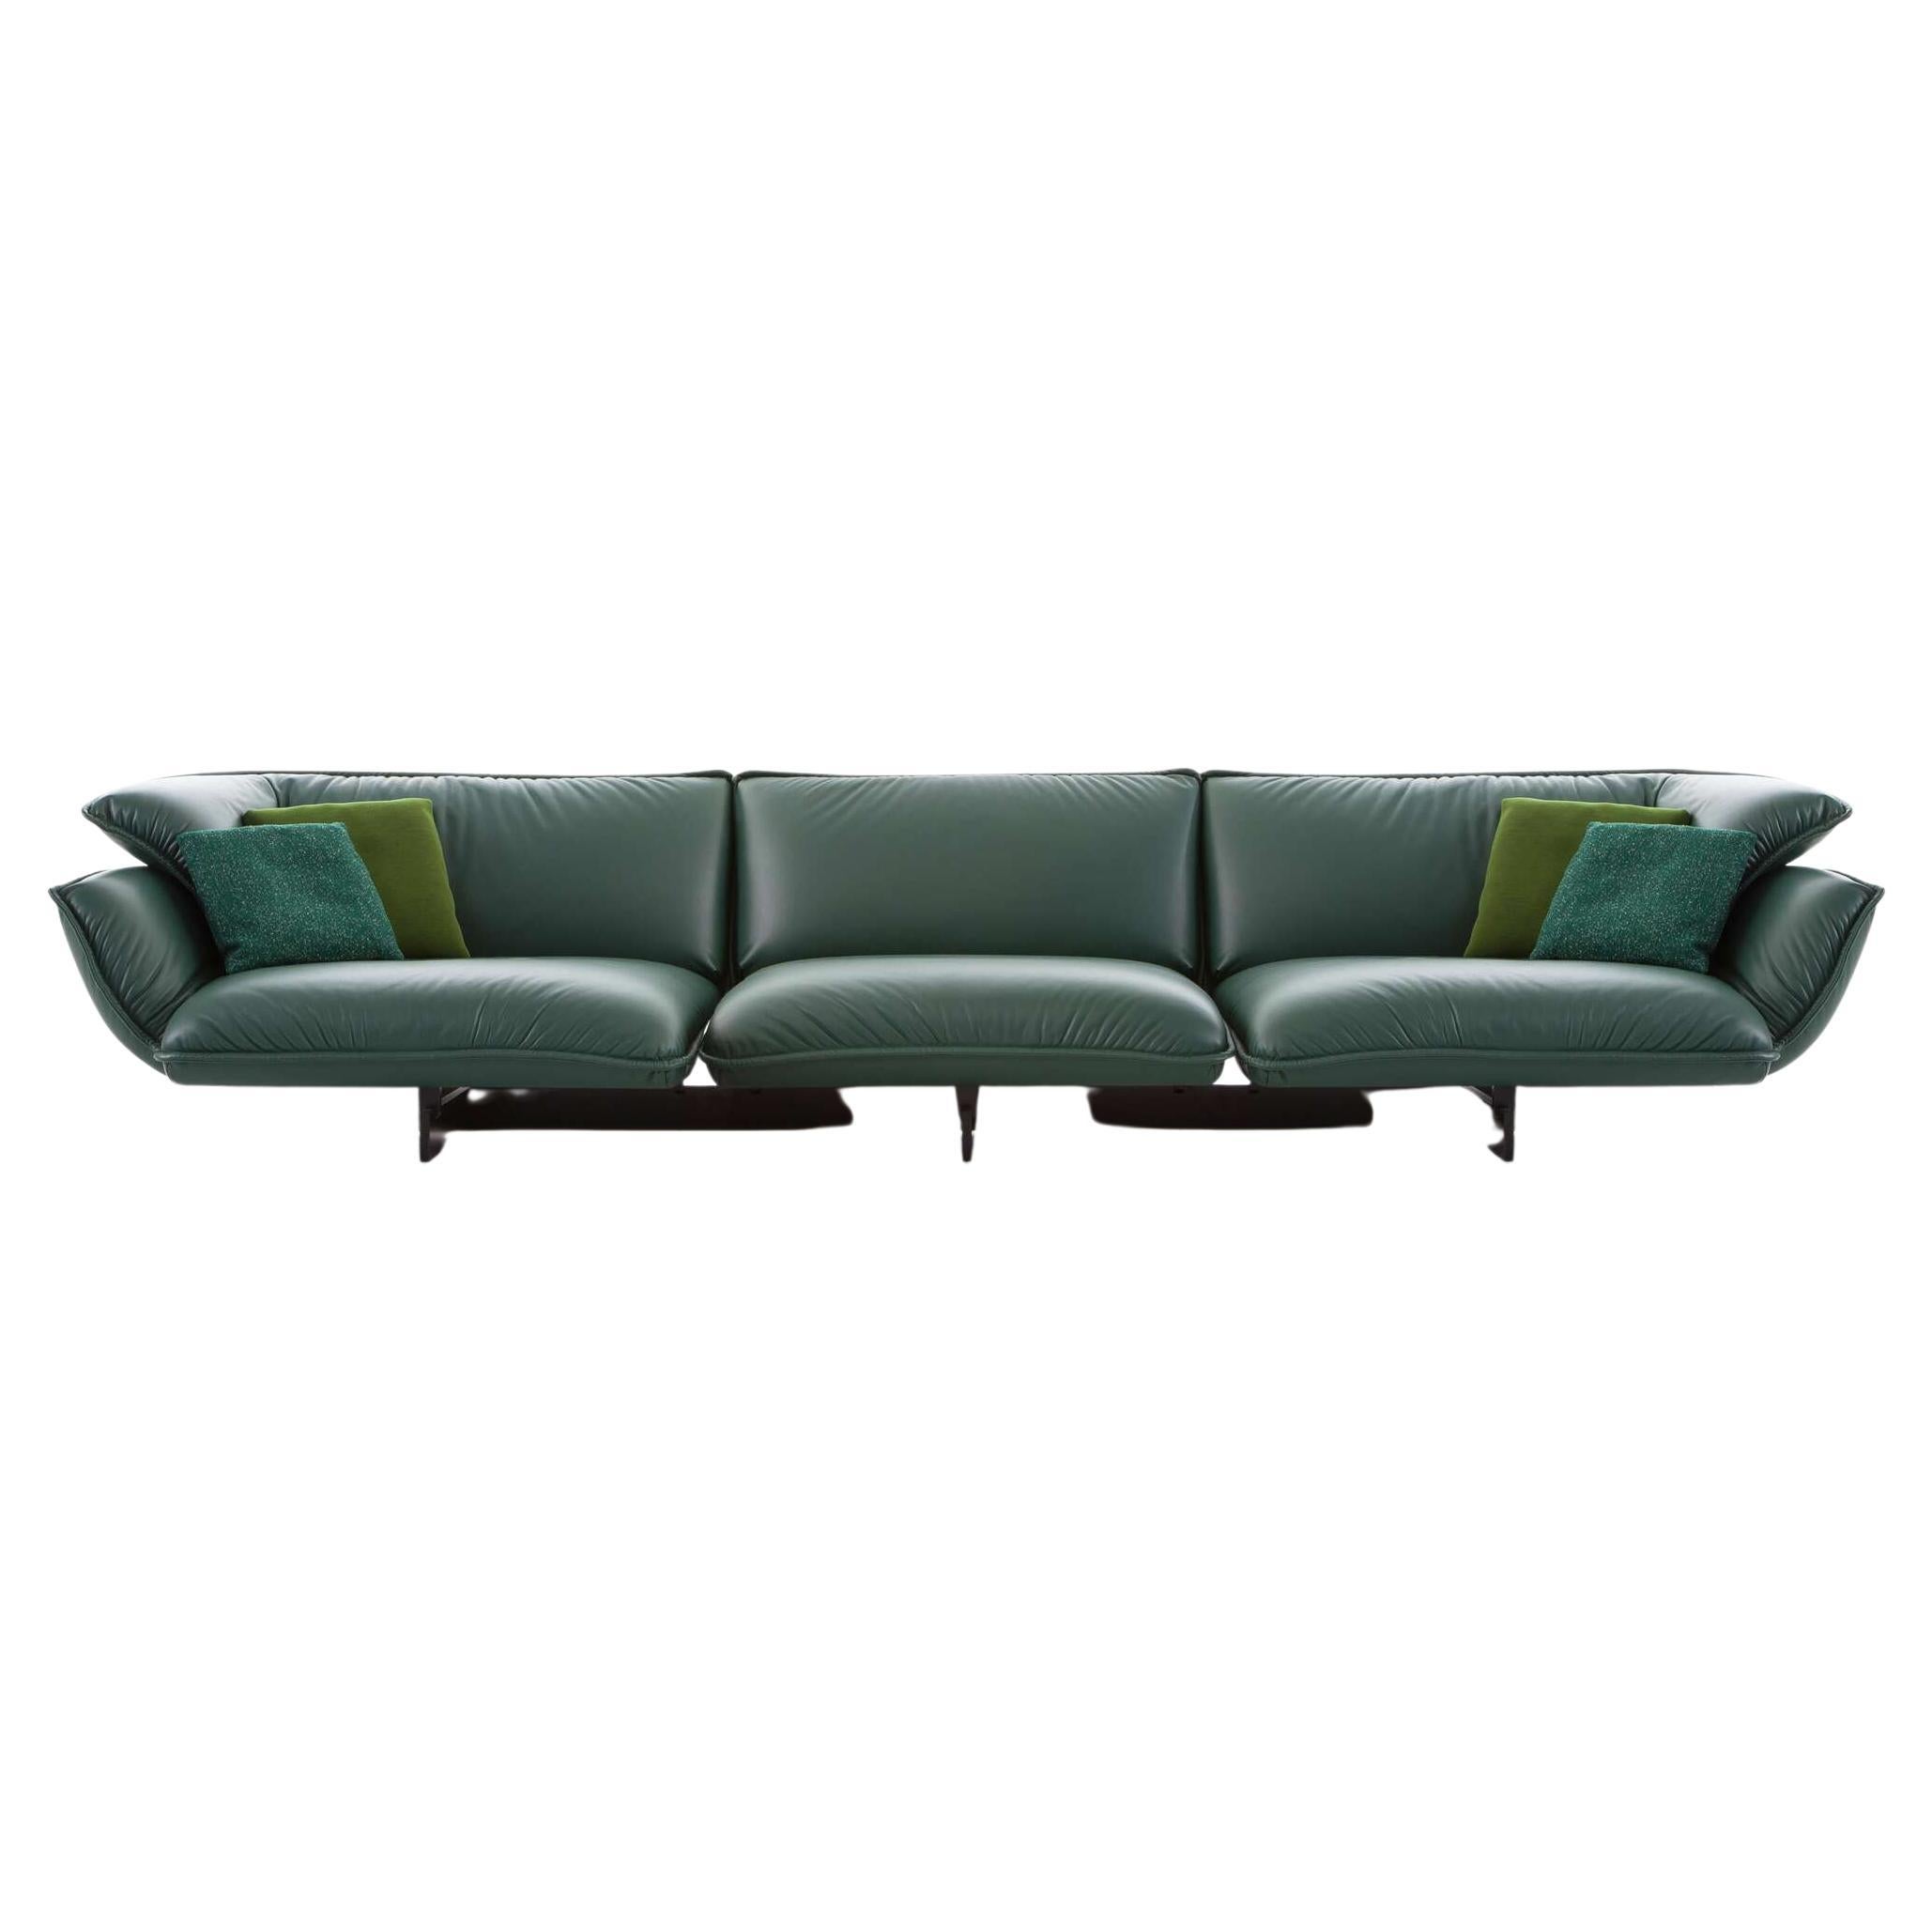 Modular sofa designed by Patricia Urquiola in 2016. Manufactured by Cassina in Italy. Prices are dependent on the color, material and size of the sofa. The price given applies to the sofa as seen on the first picture. 